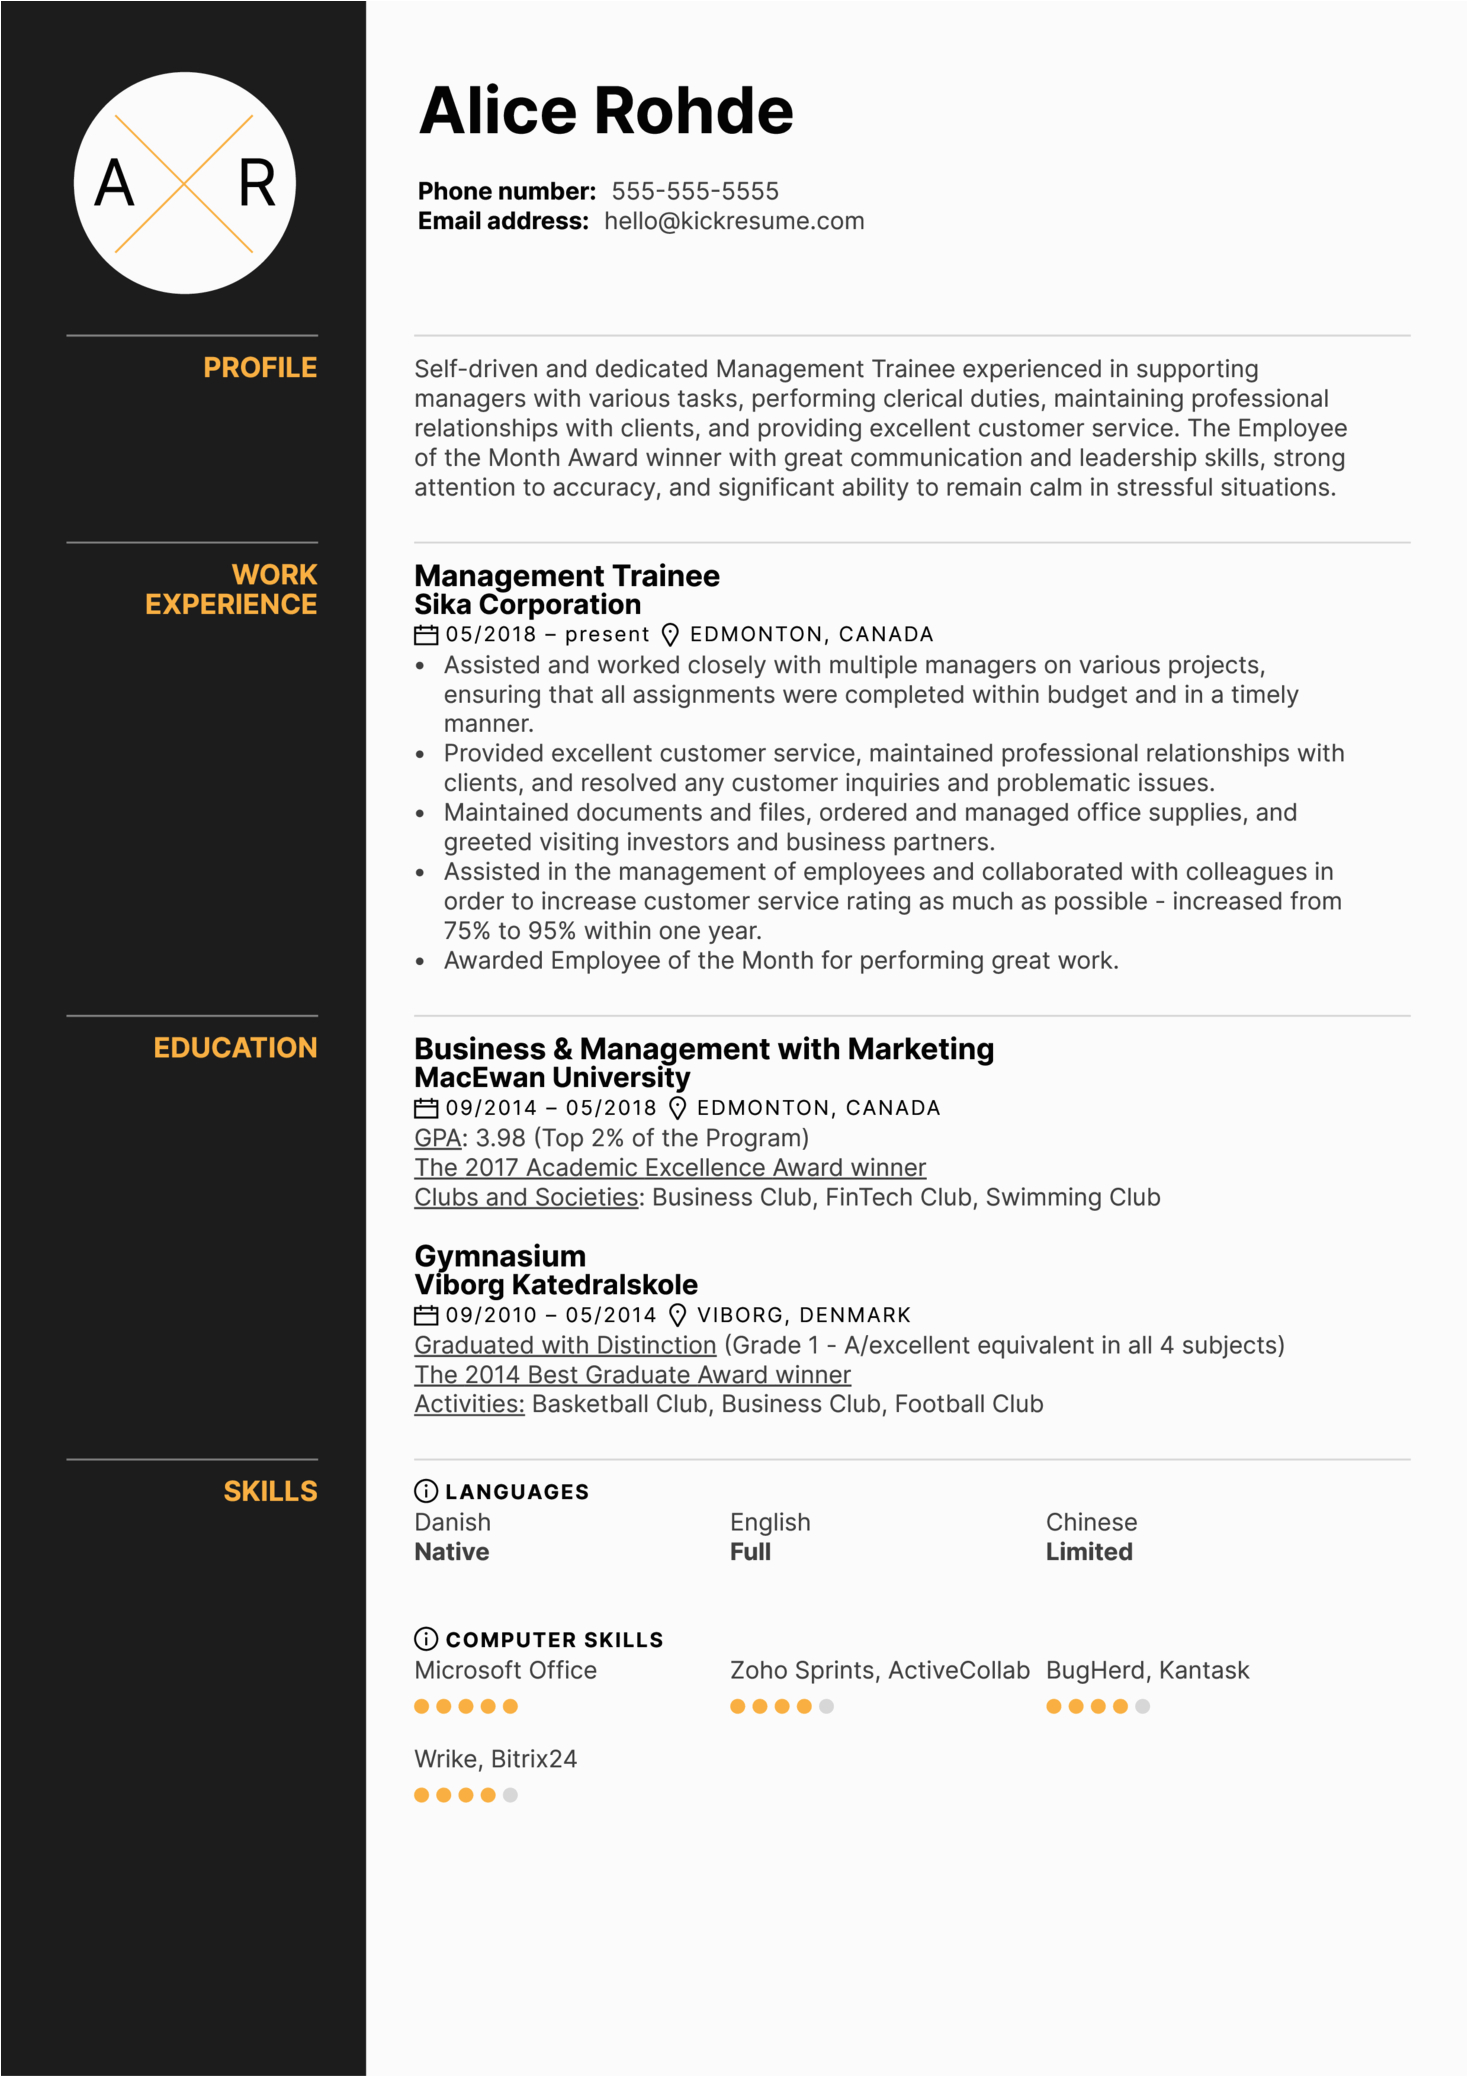 Resume Sample for Management Trainee Position Management Trainee Resume Example